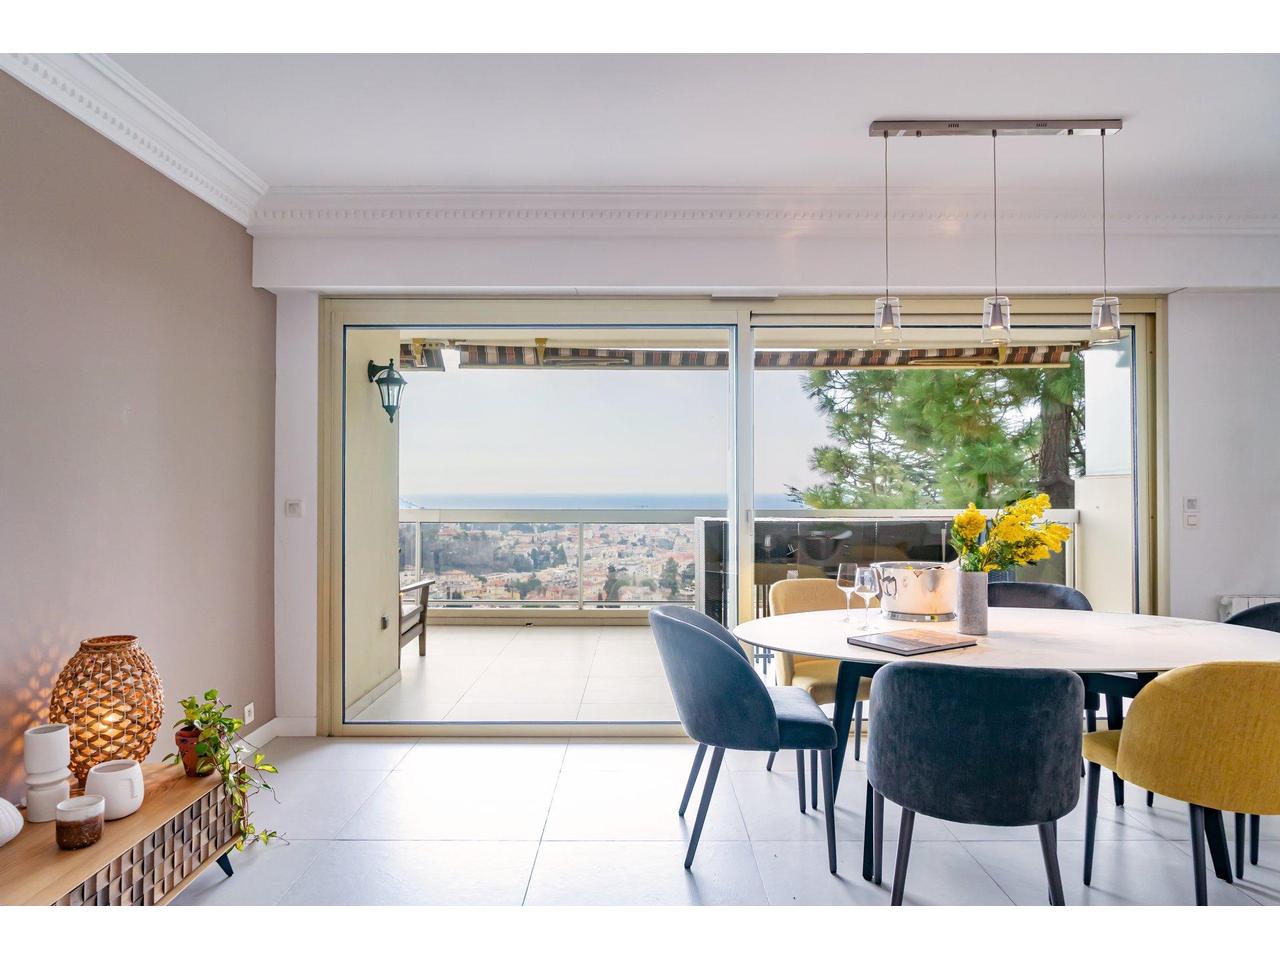 Nice Riviera - Agence Immobiliére Nice Côte d'Azur | Appartement  4 Rooms 114.47m2  for sale   895 000 €